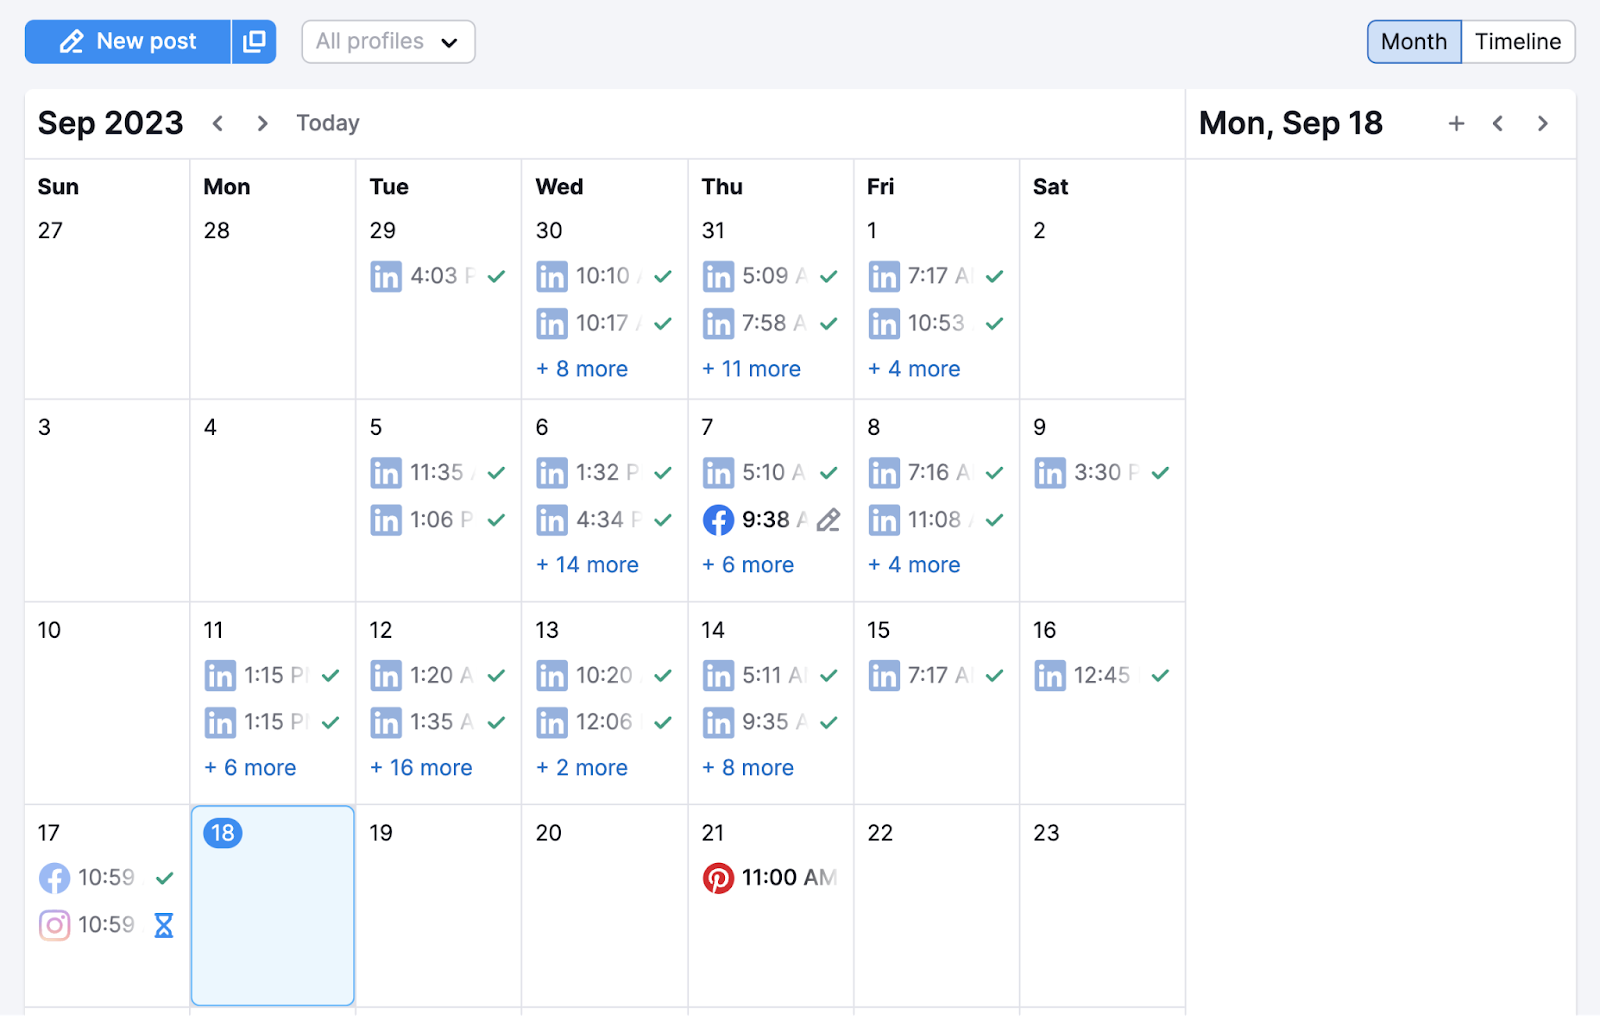 Content calendar in the Social Poster tool